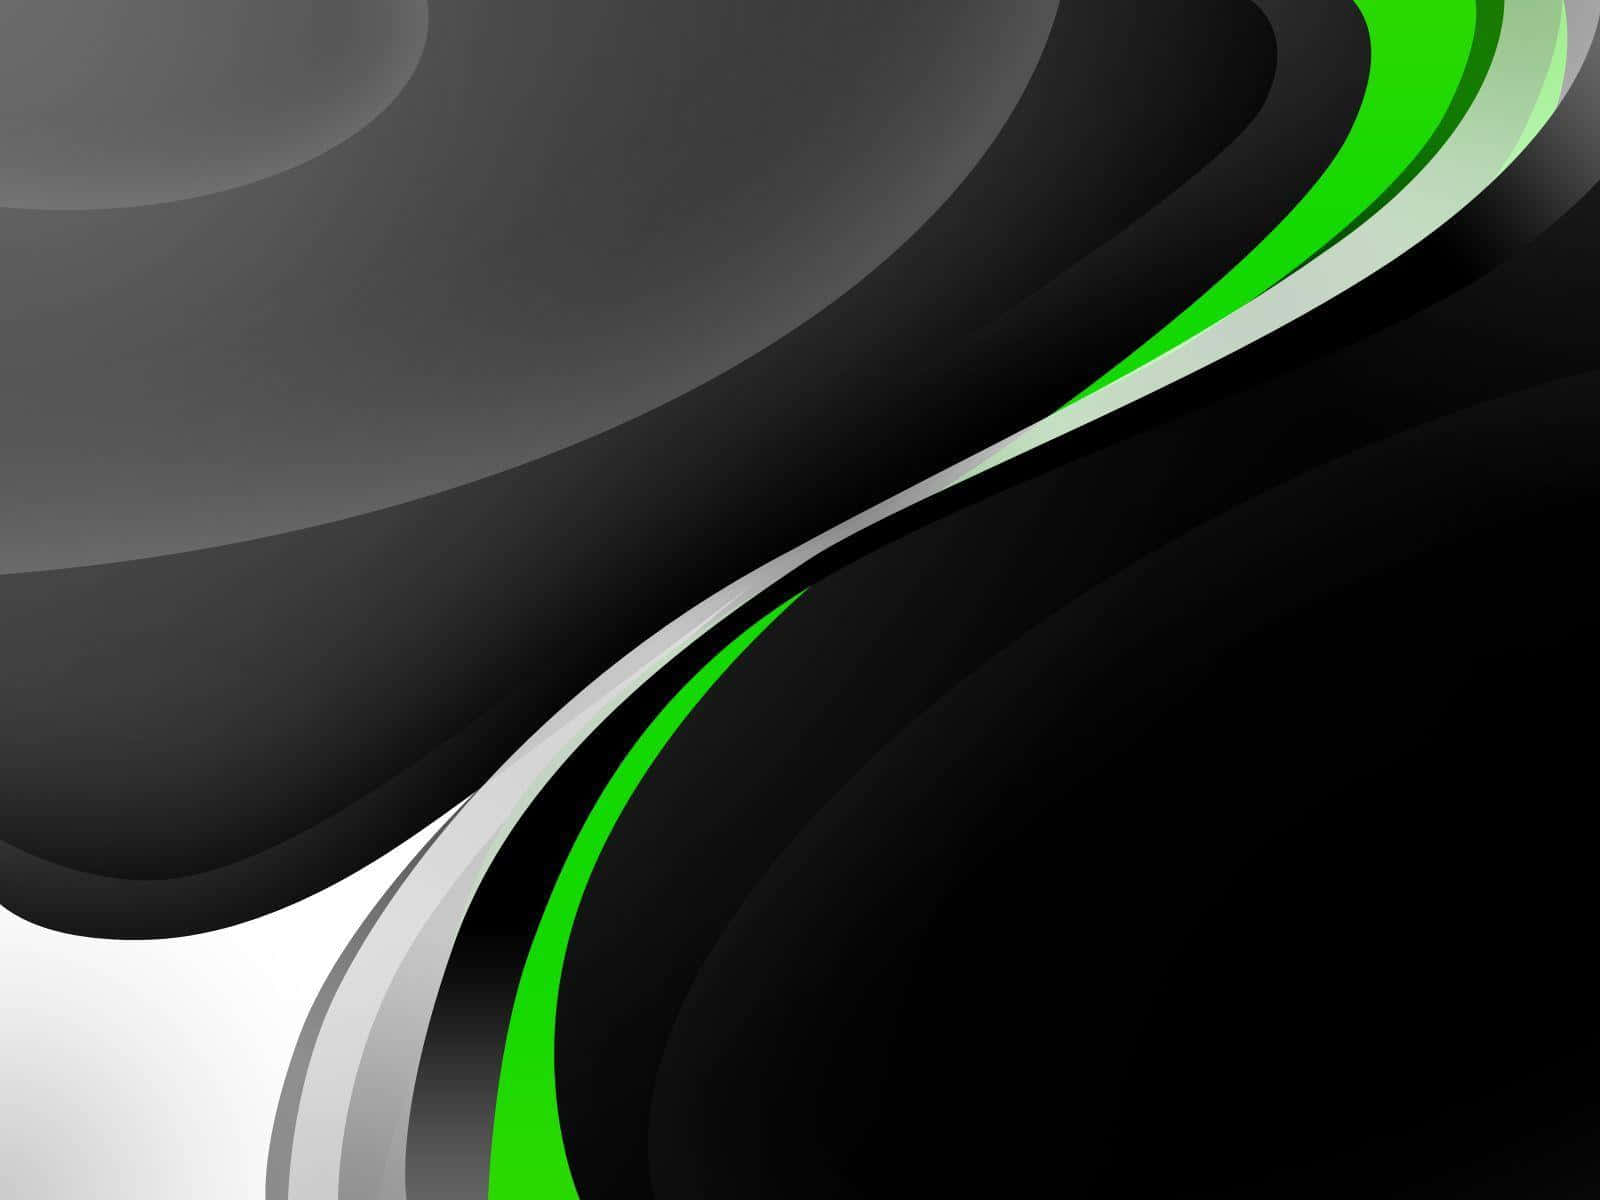 Captivating Black and Green Gradient